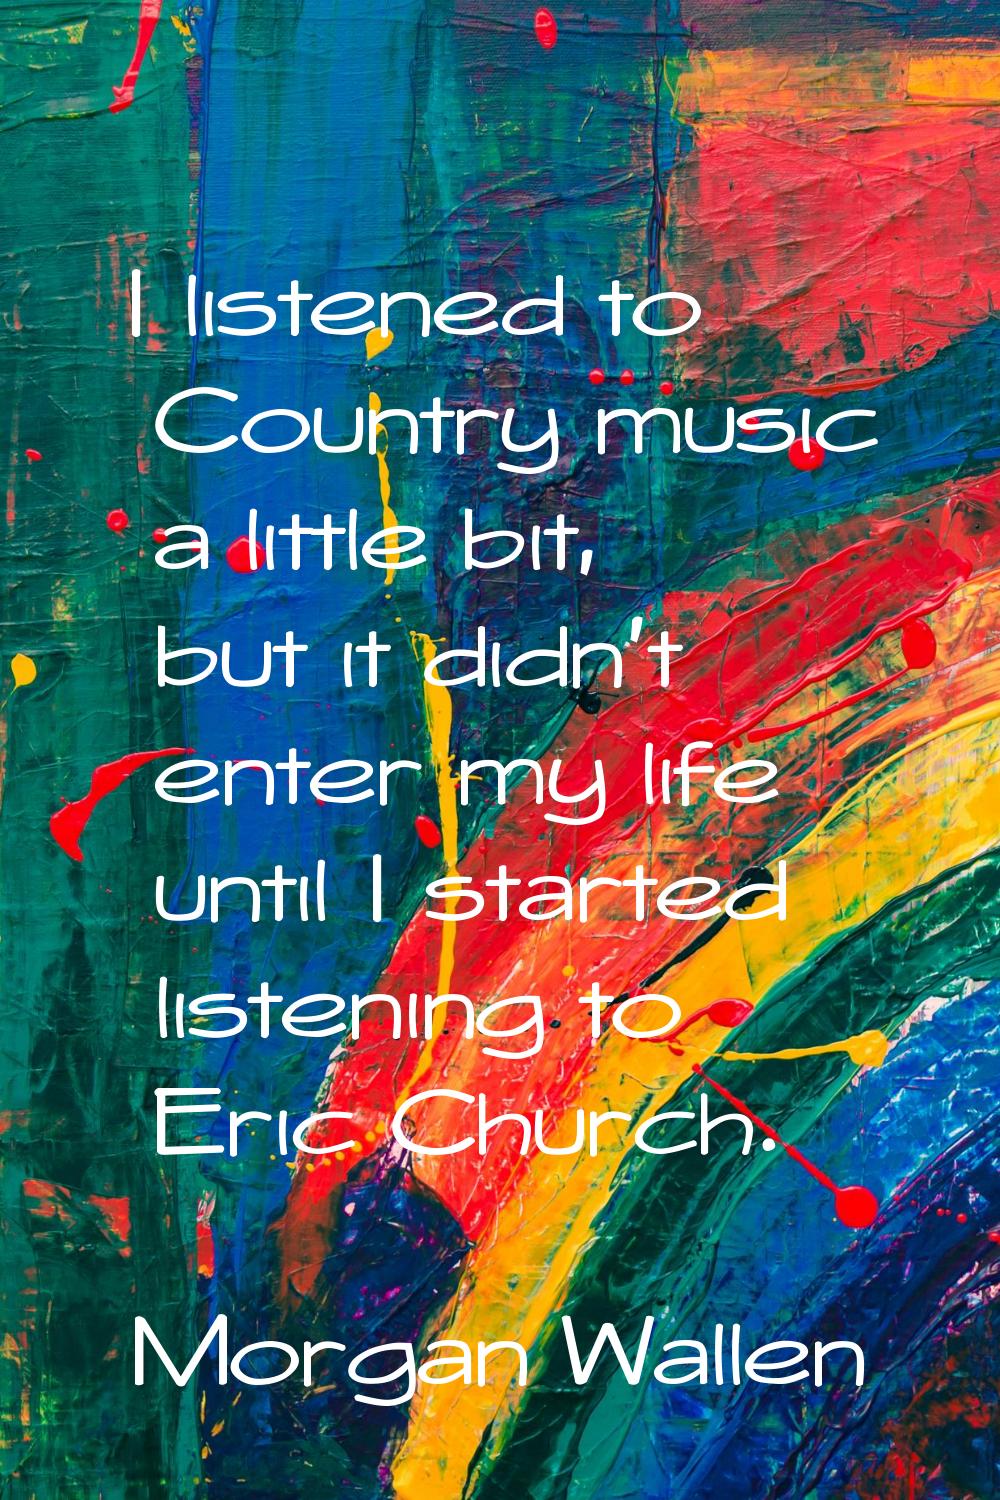 I listened to Country music a little bit, but it didn't enter my life until I started listening to 